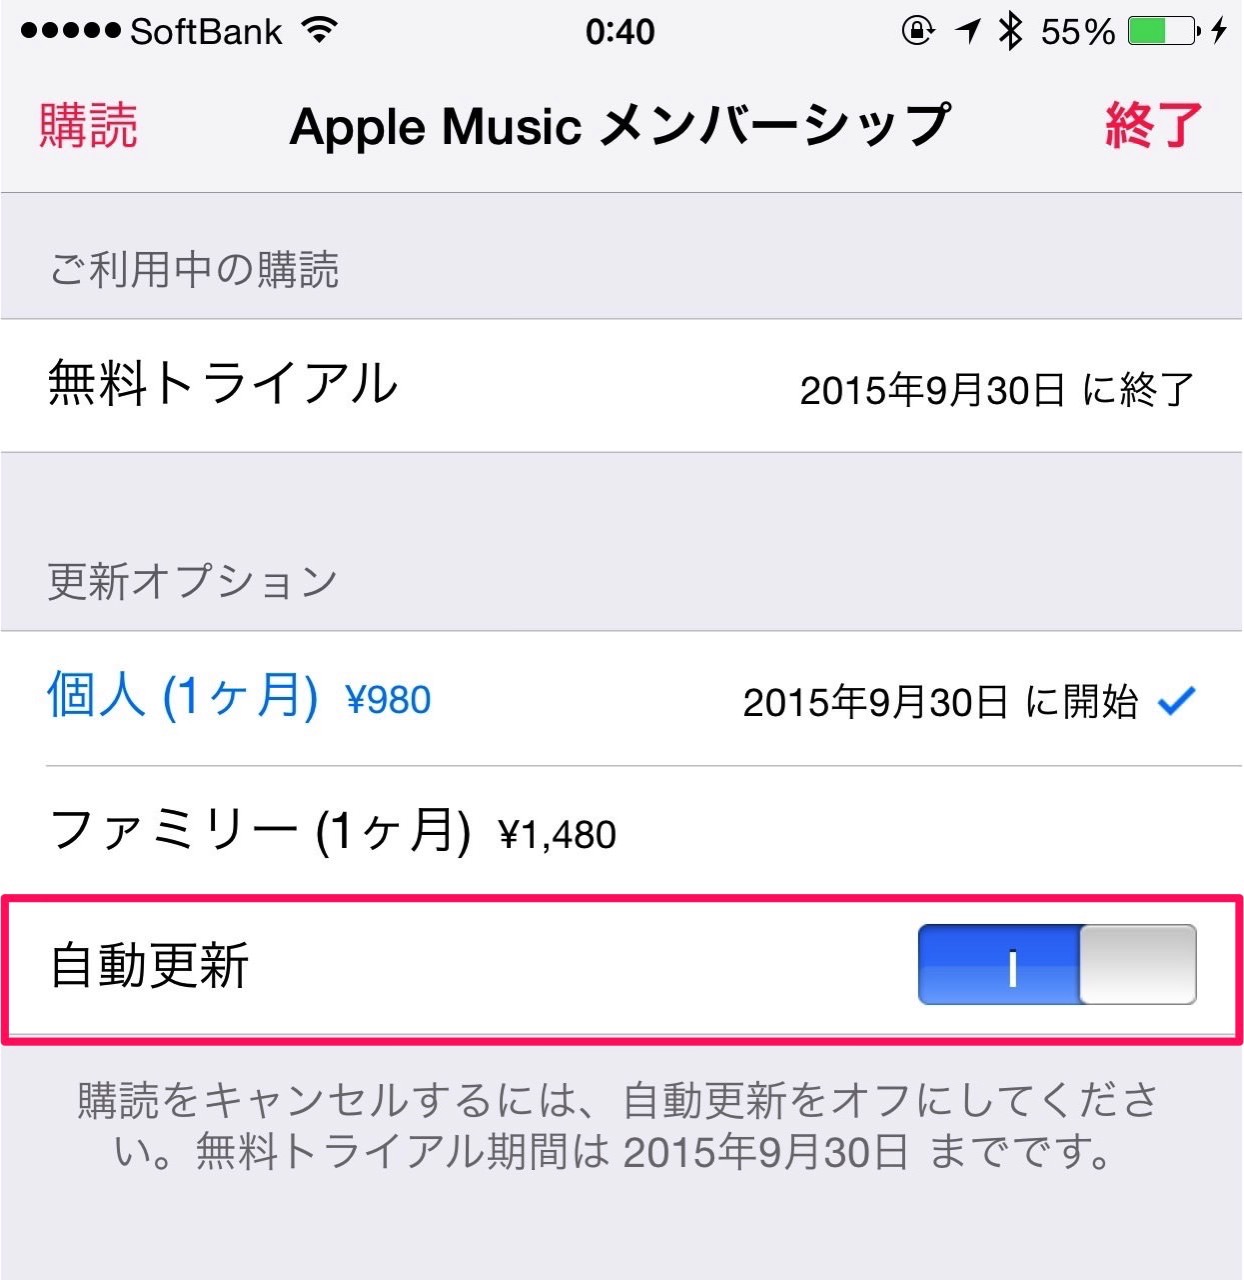 How to turn off automatic update apple music in iphone 8